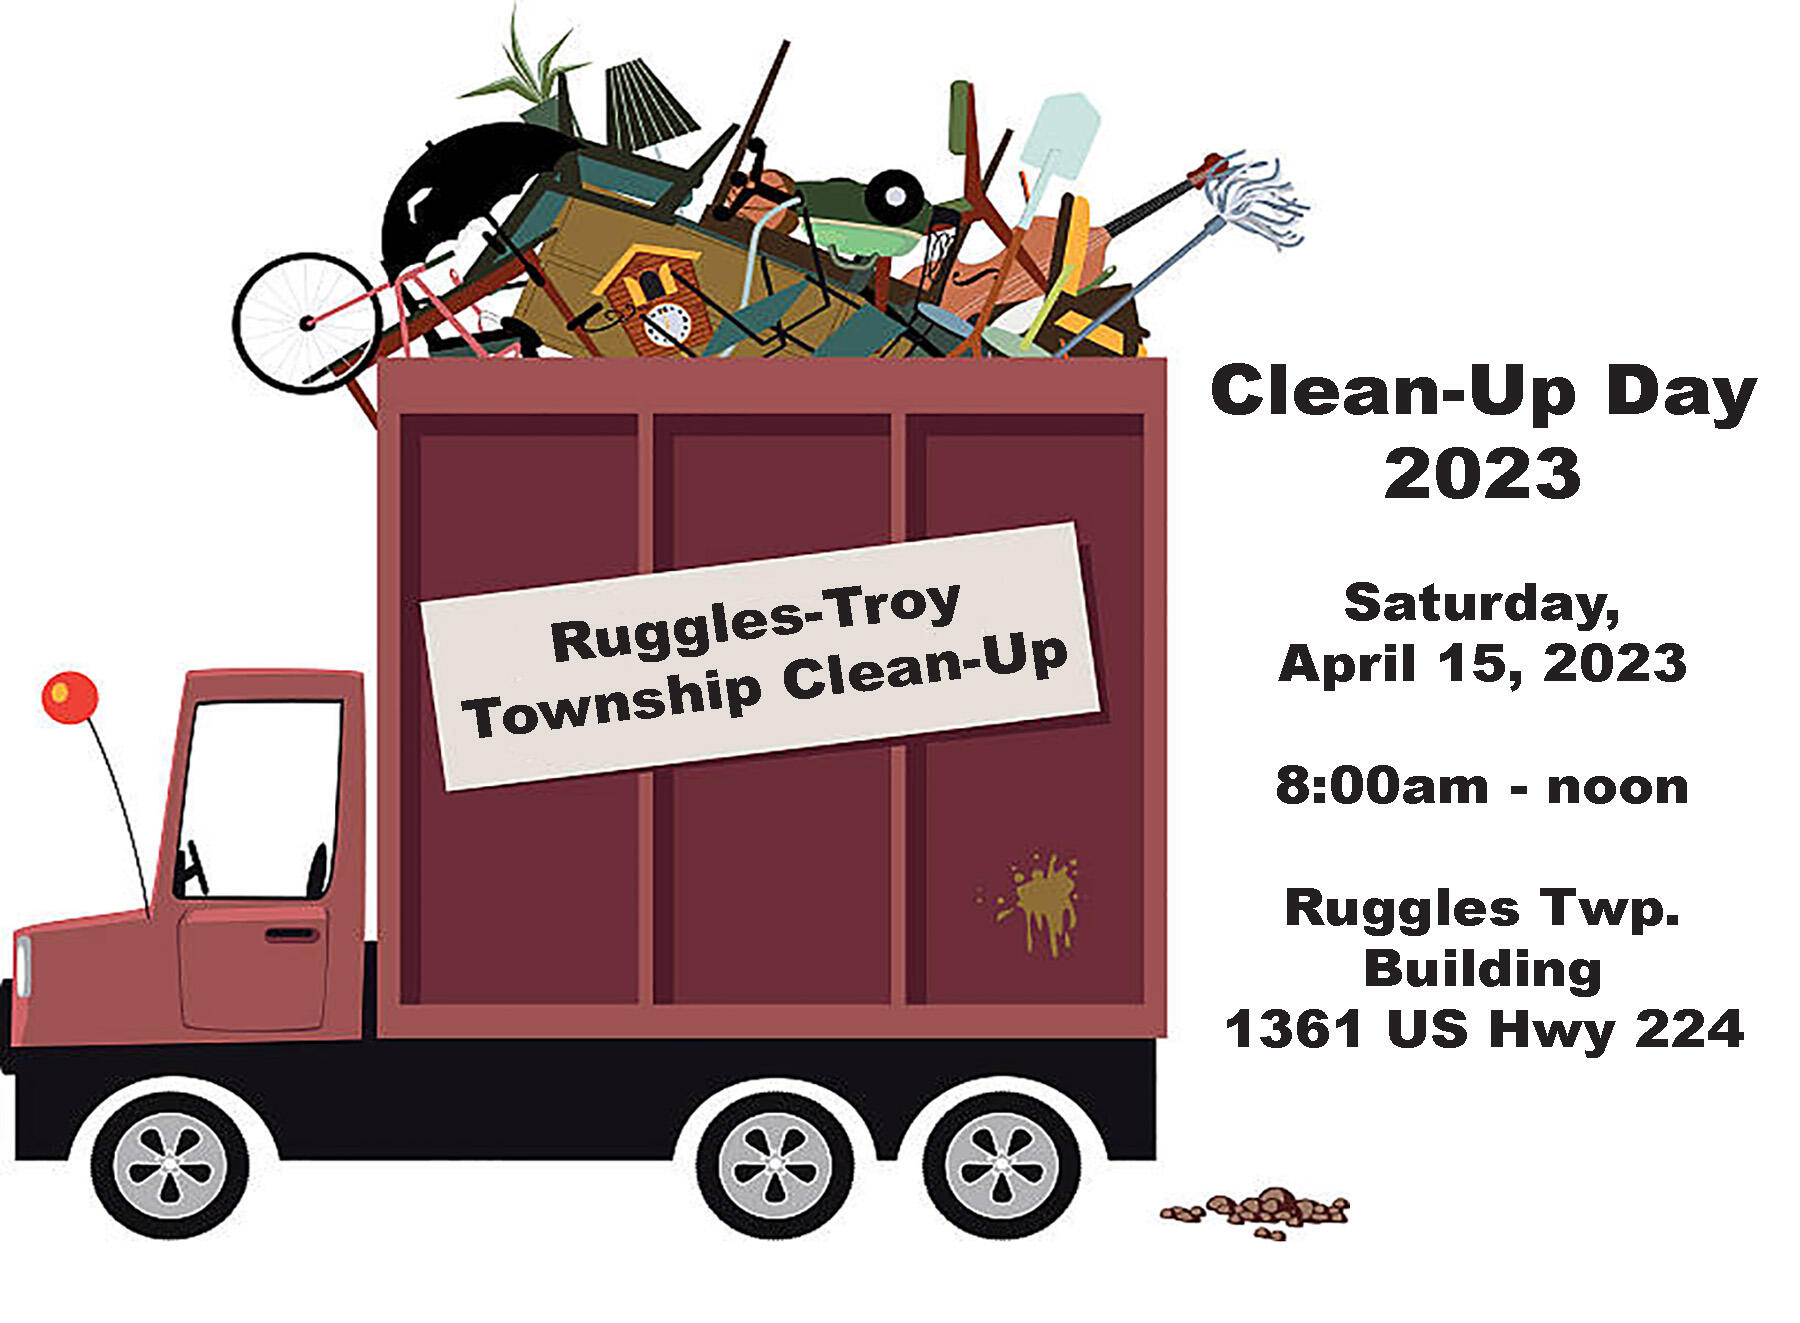 Troy Township Cleanup Day 2023 at the Ruggles Township Building